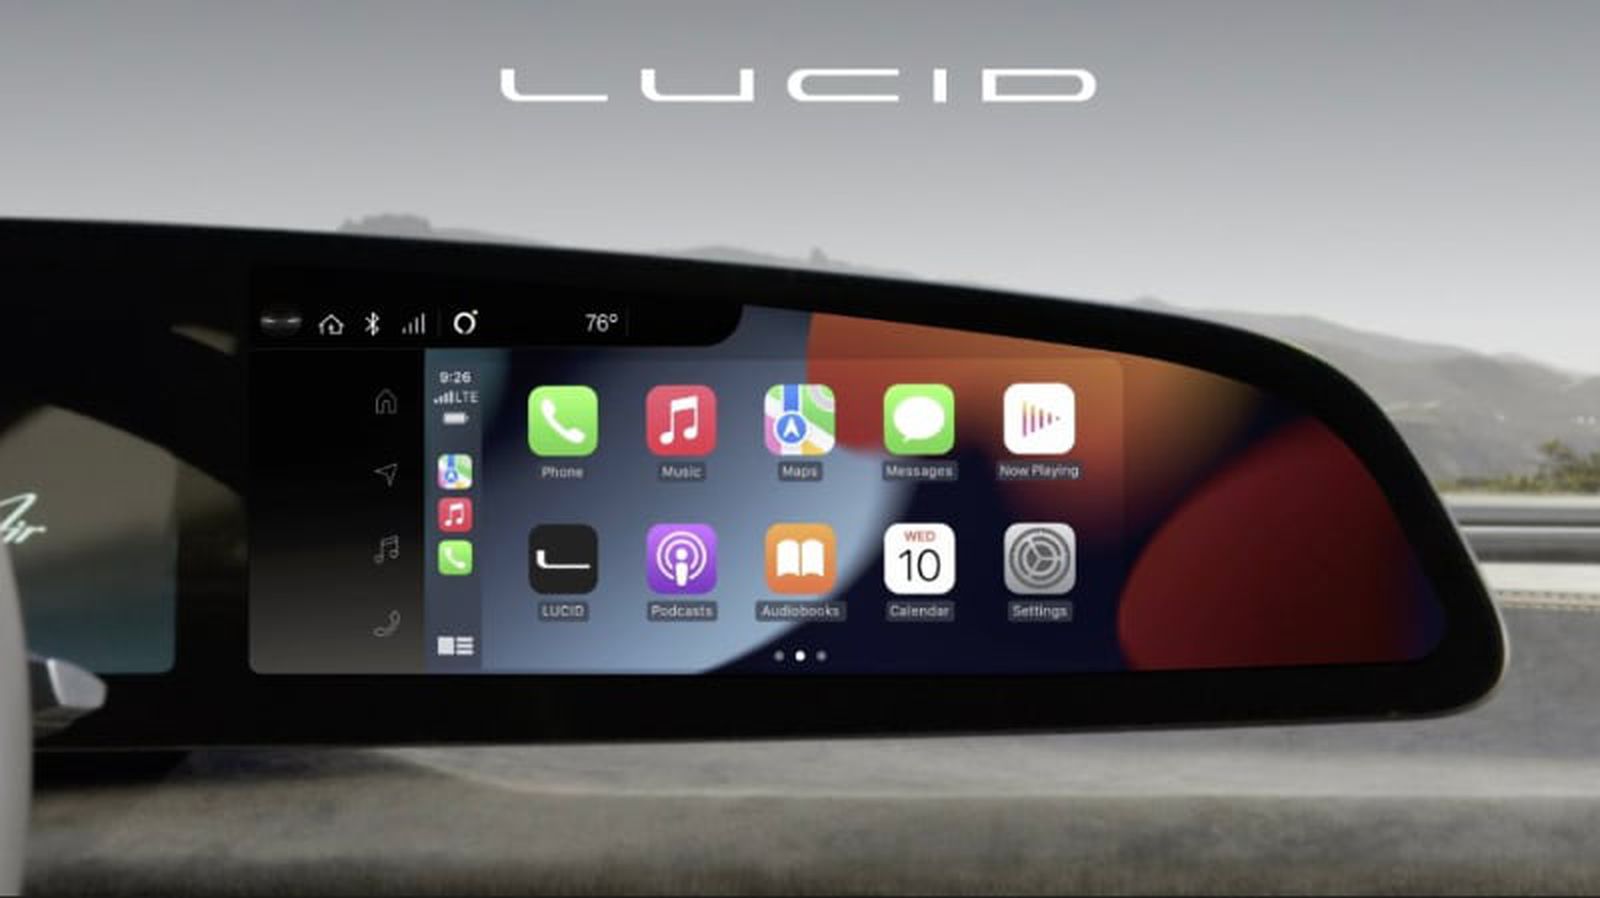 Lucid Air Electric Vehicles Now Feature Wireless CarPlay Integration - macrumors.com